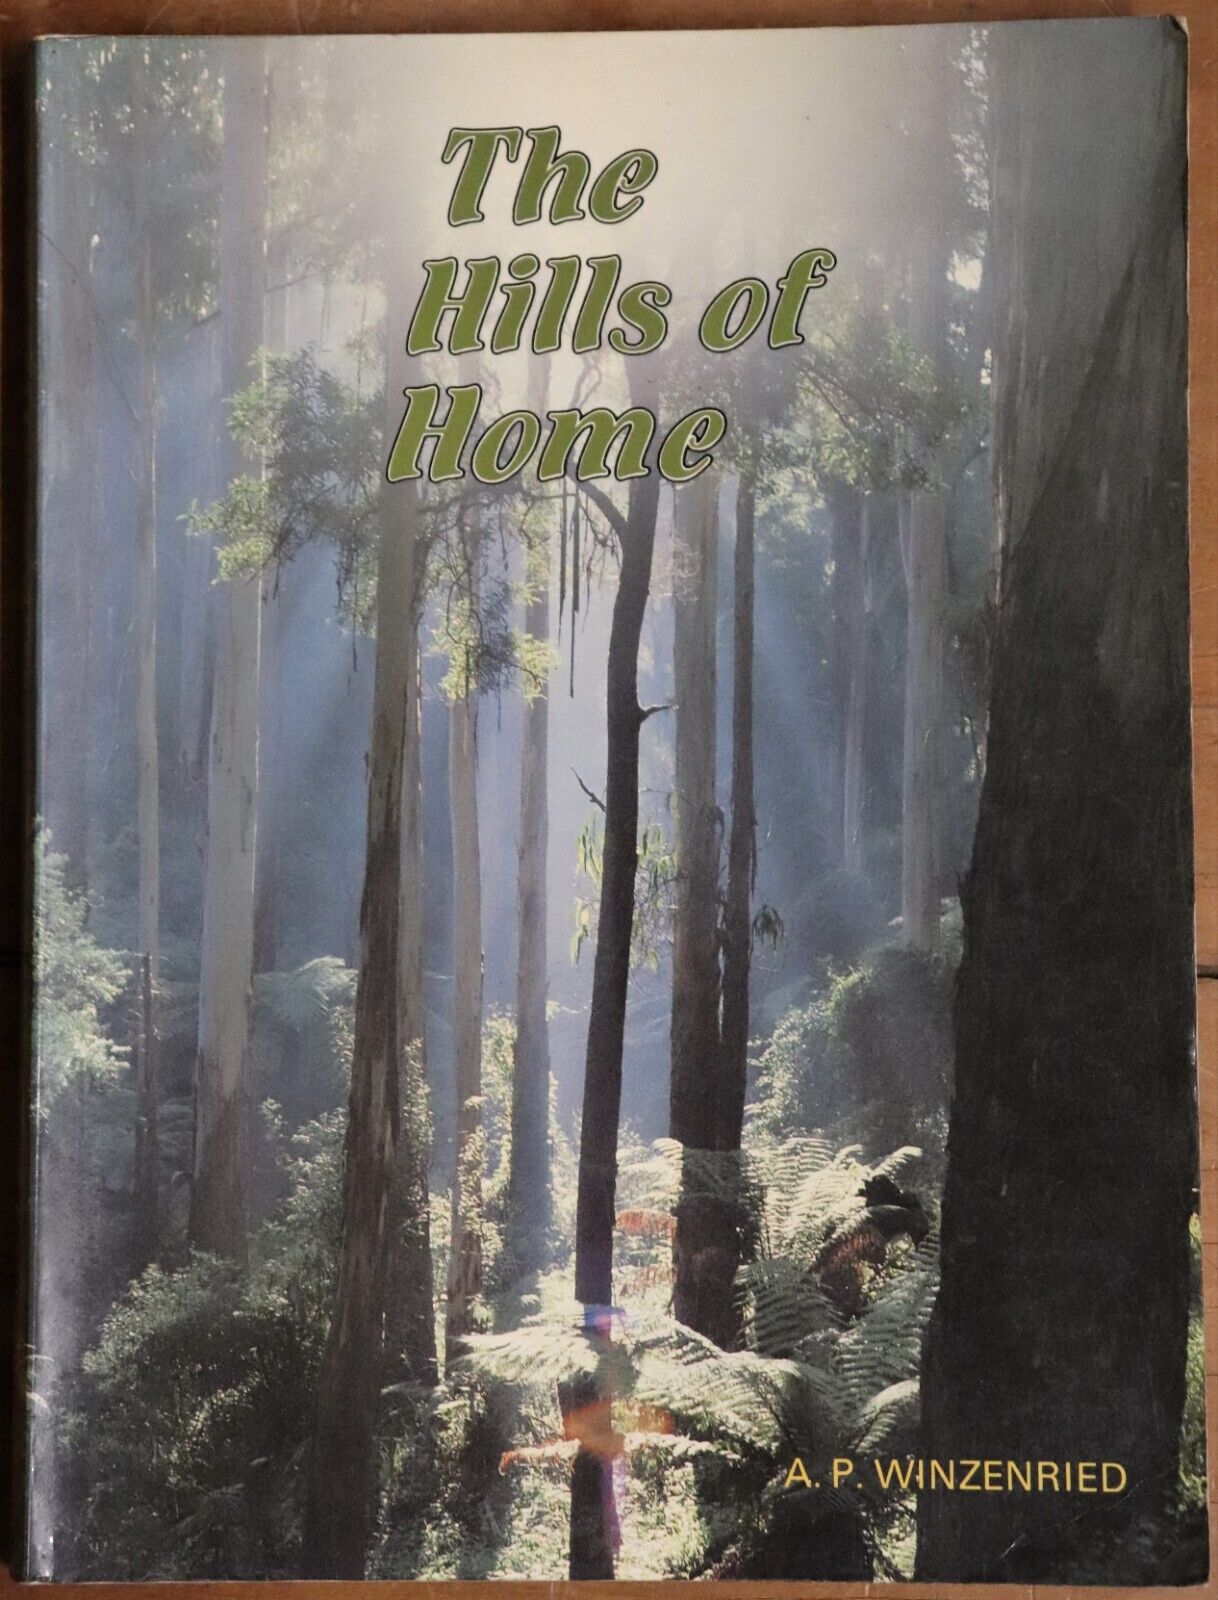 The Hills of Home by AP Winzenried - 1988 - Dandenong Ranges Local History Book